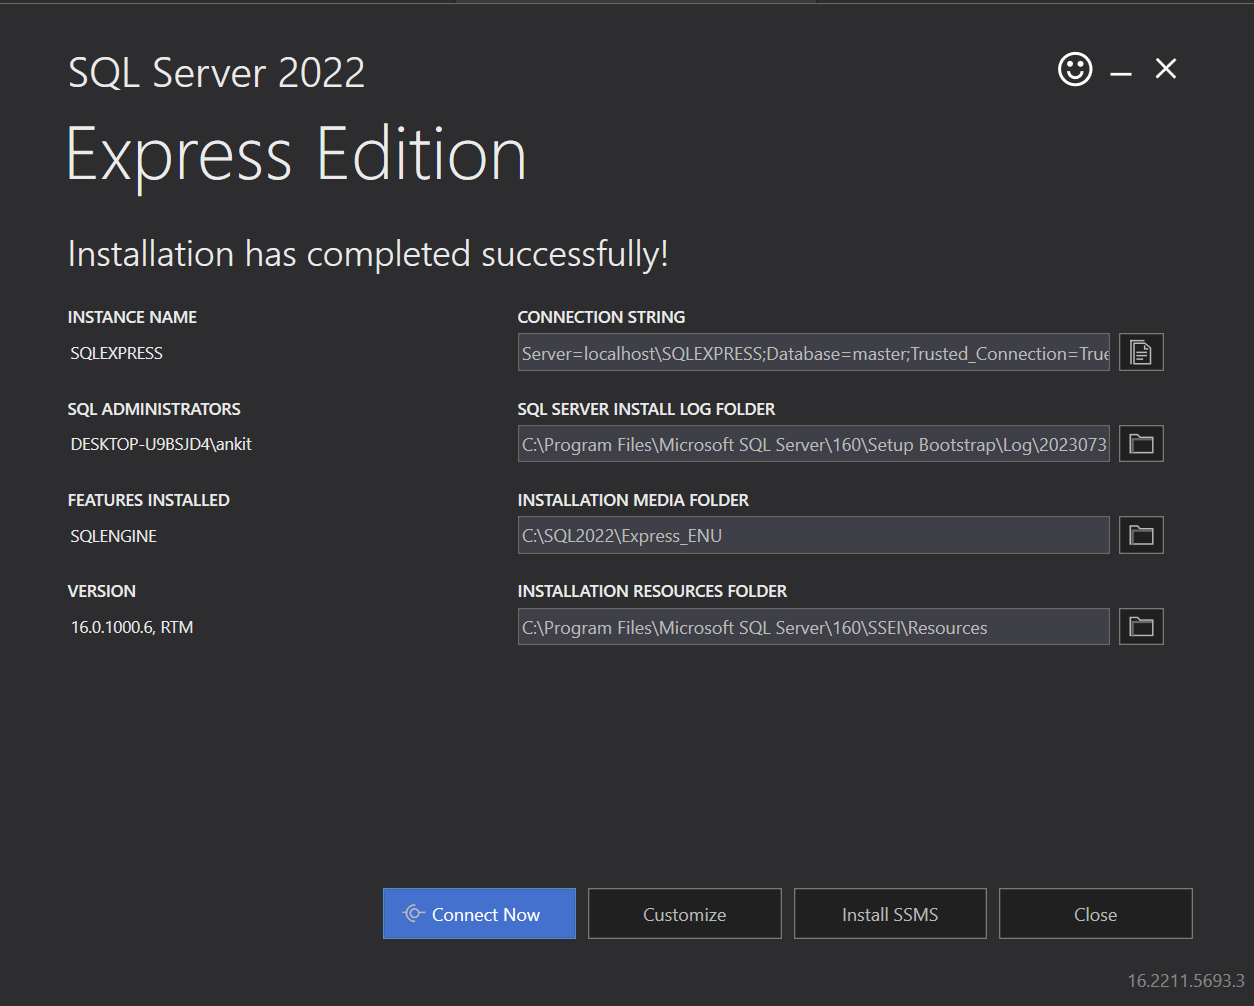 Window showing Installation of SSMS Button in the final screen of SQL Server 2022 Express Edition